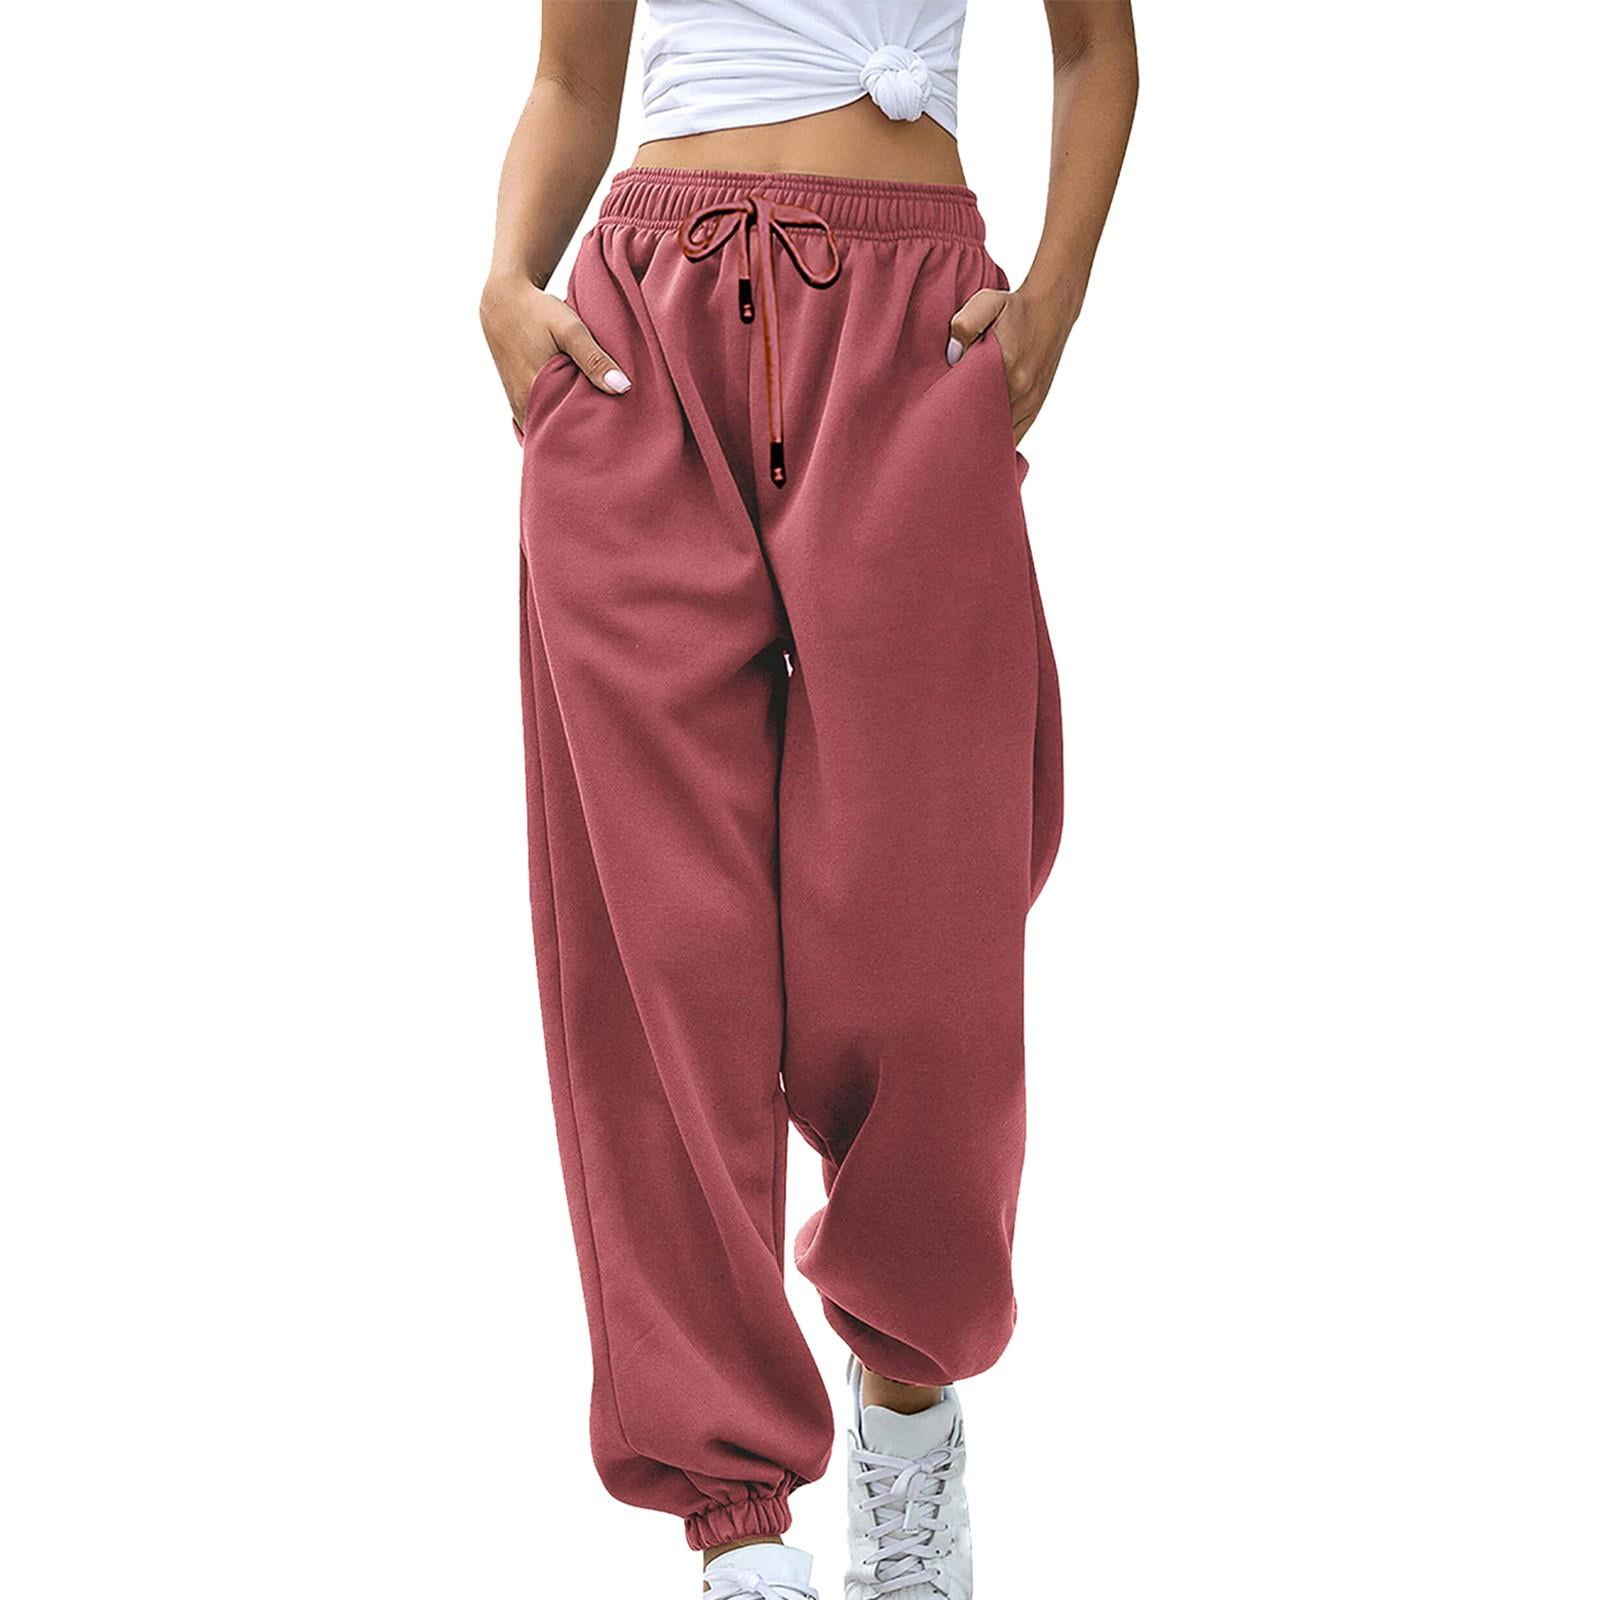 Tdoqot Sweatpants for Women- Baggy Casual Fall Fashion Red Size S 